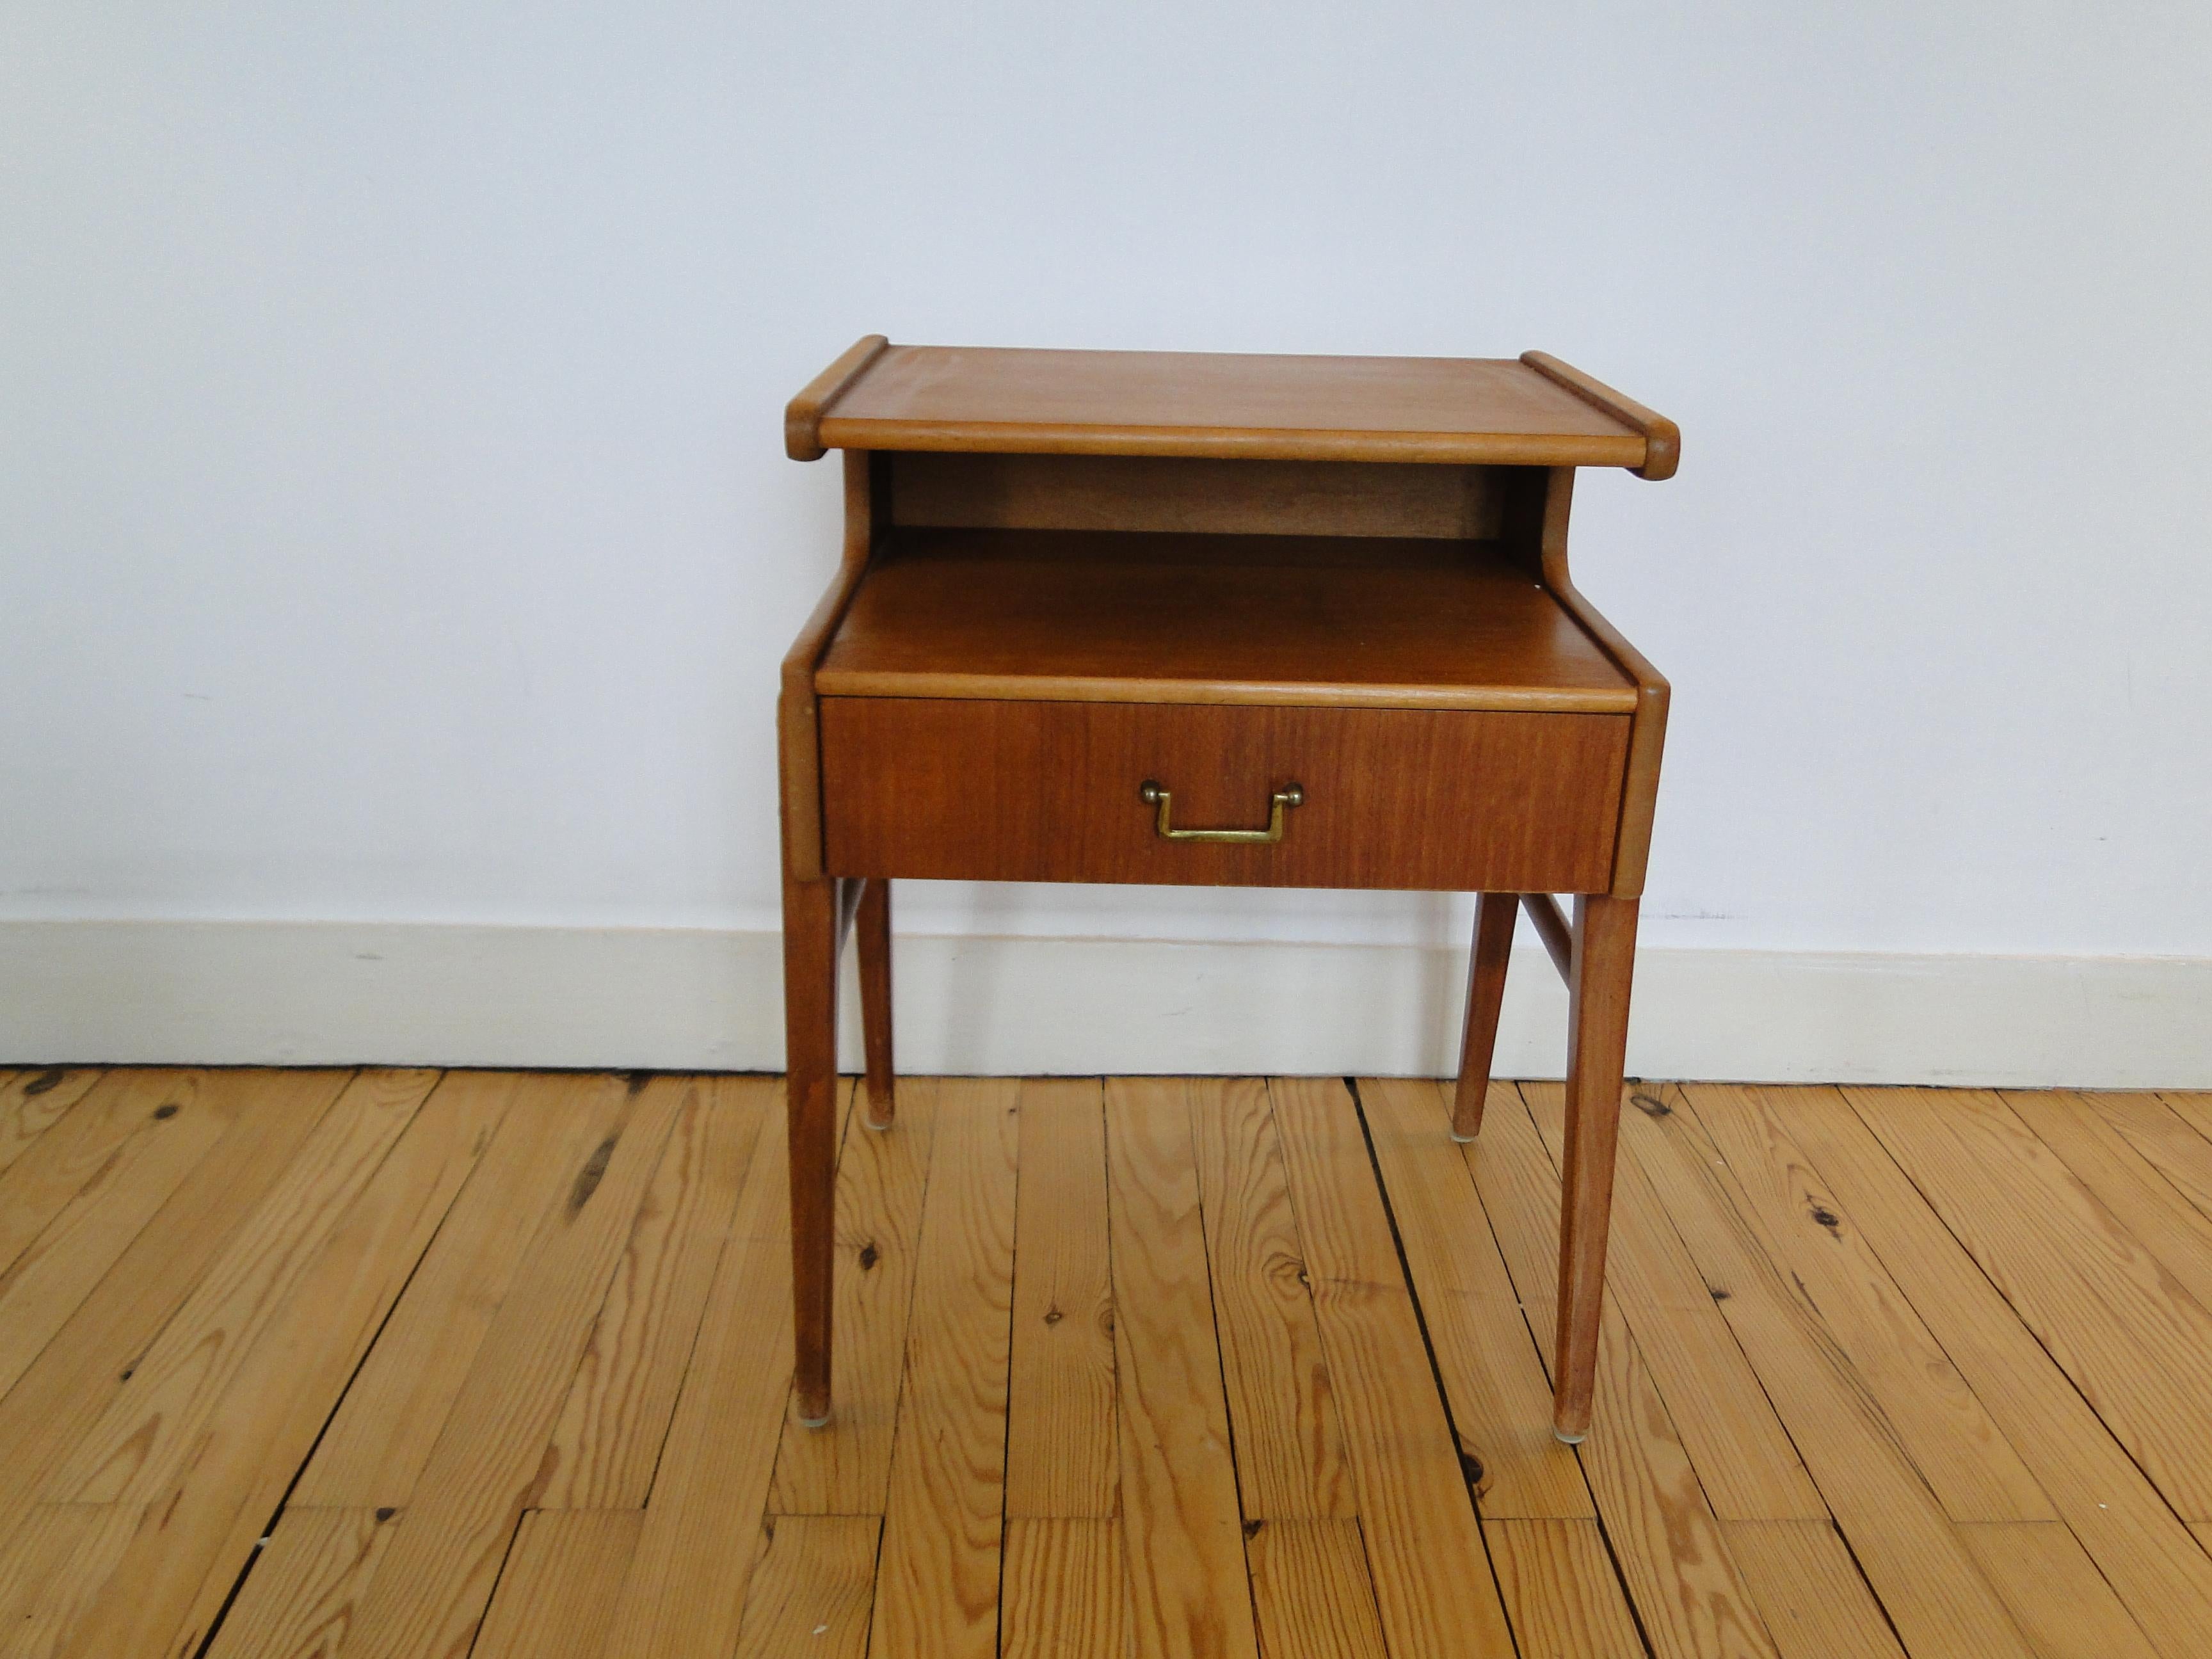 Scandinavian teak bedside table with drawer and brass handle. 
Magazine rack and shelf.
Very good condition.